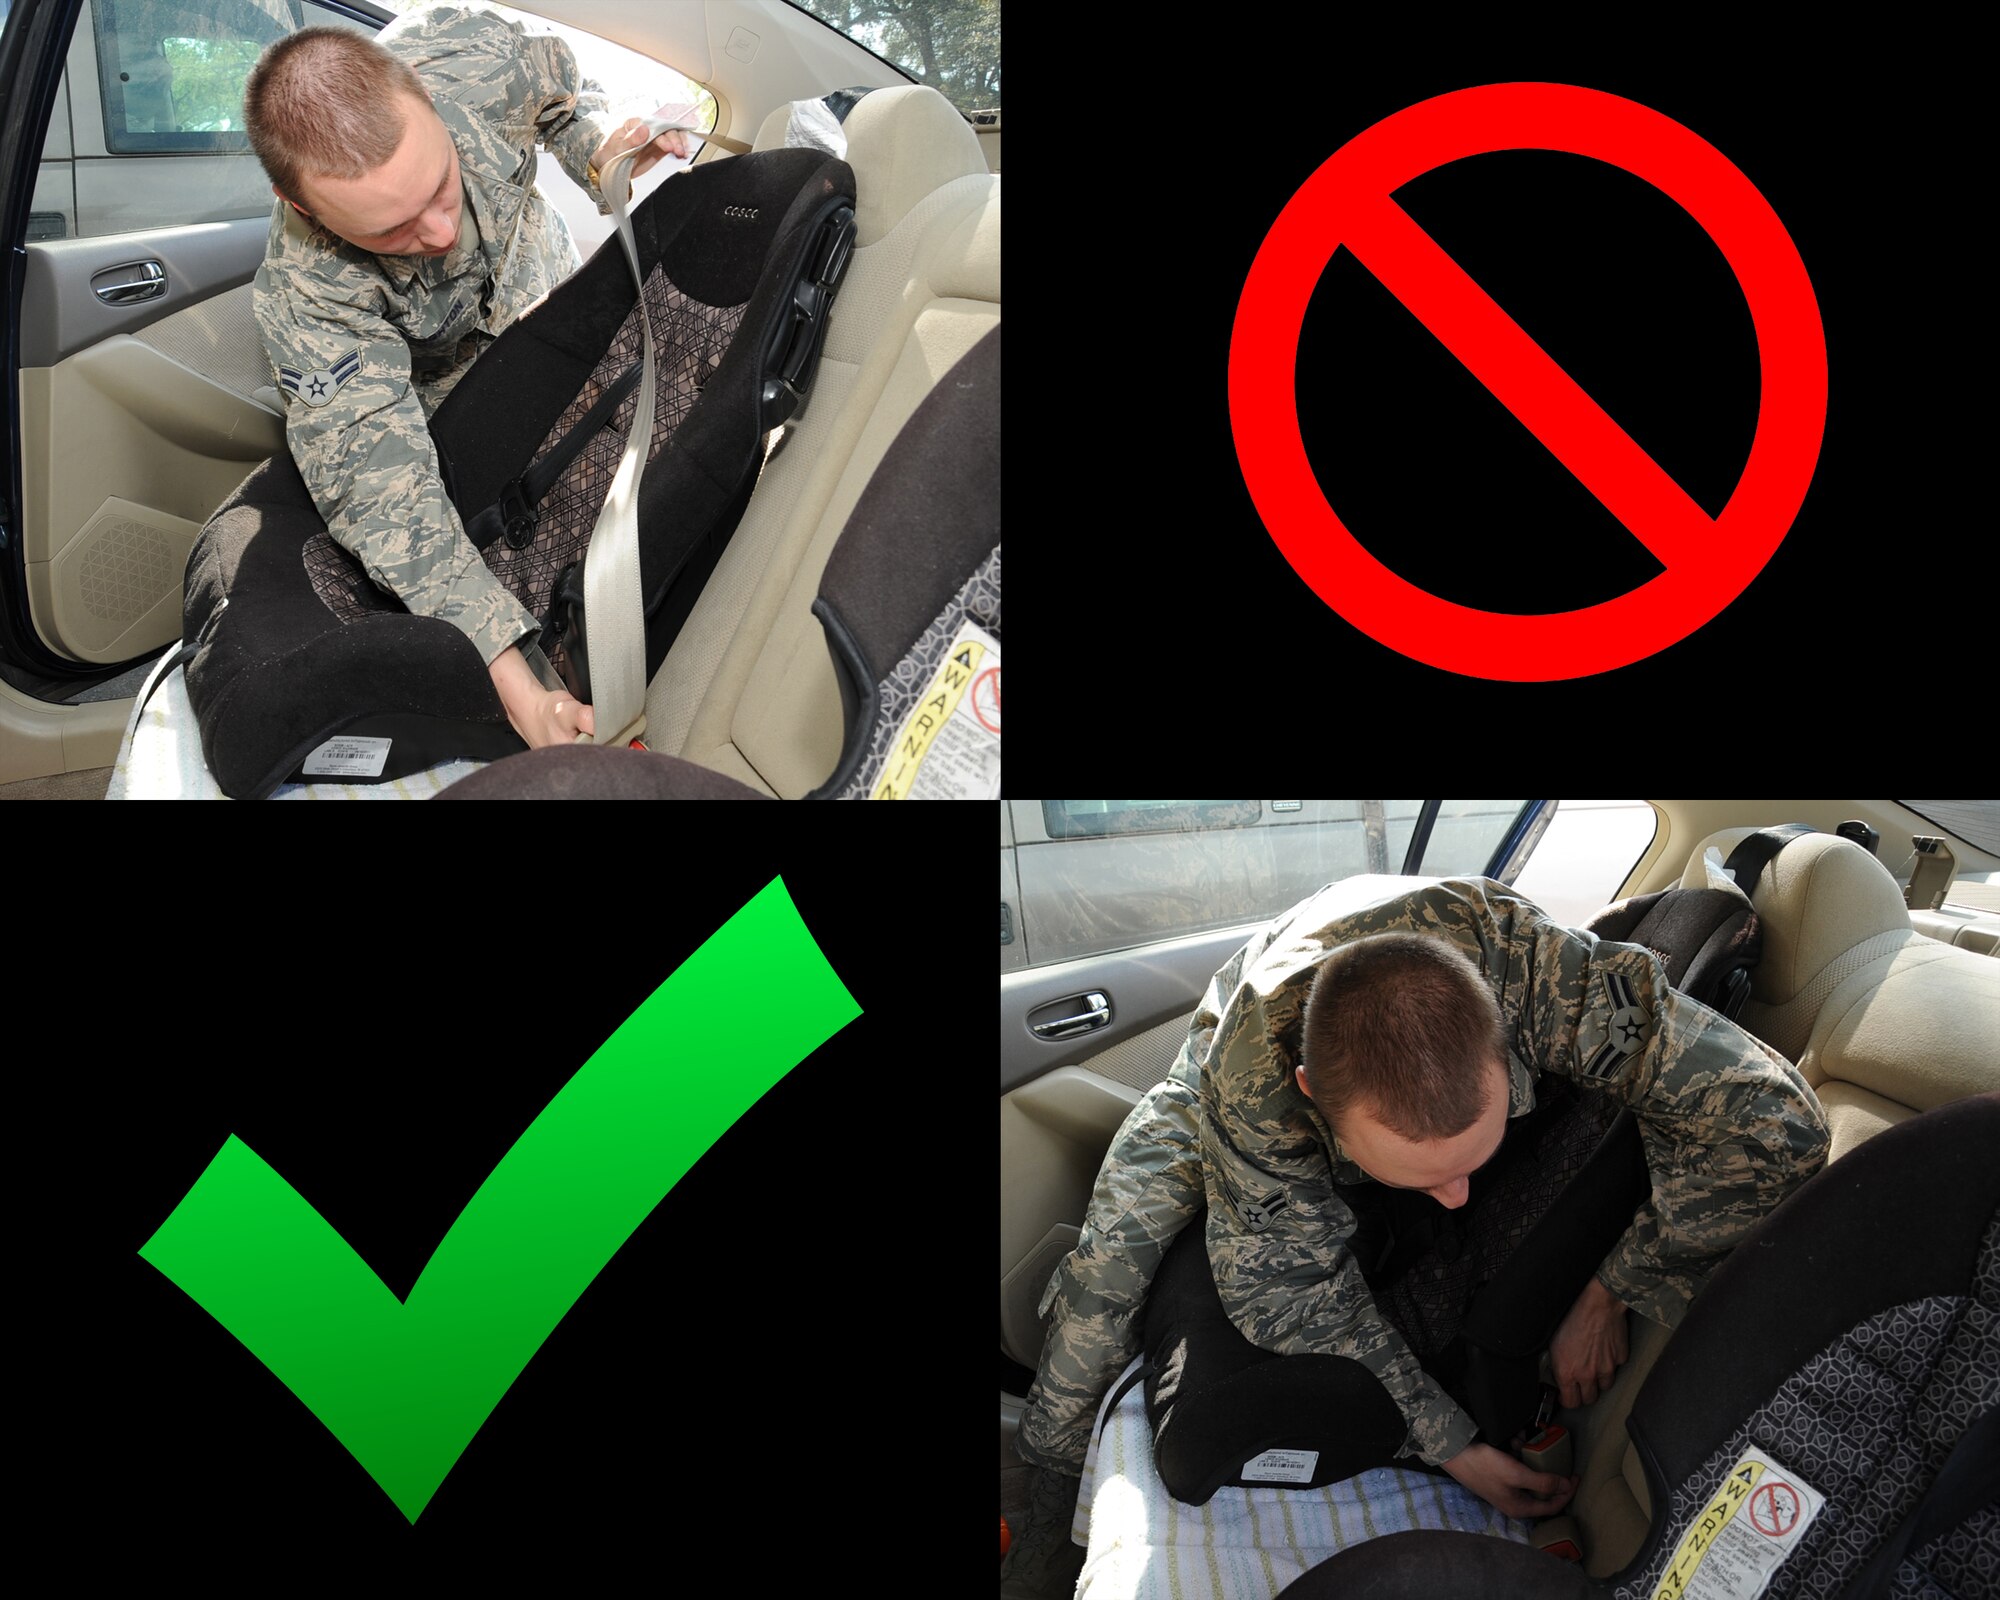 How to properly install a booster seat 